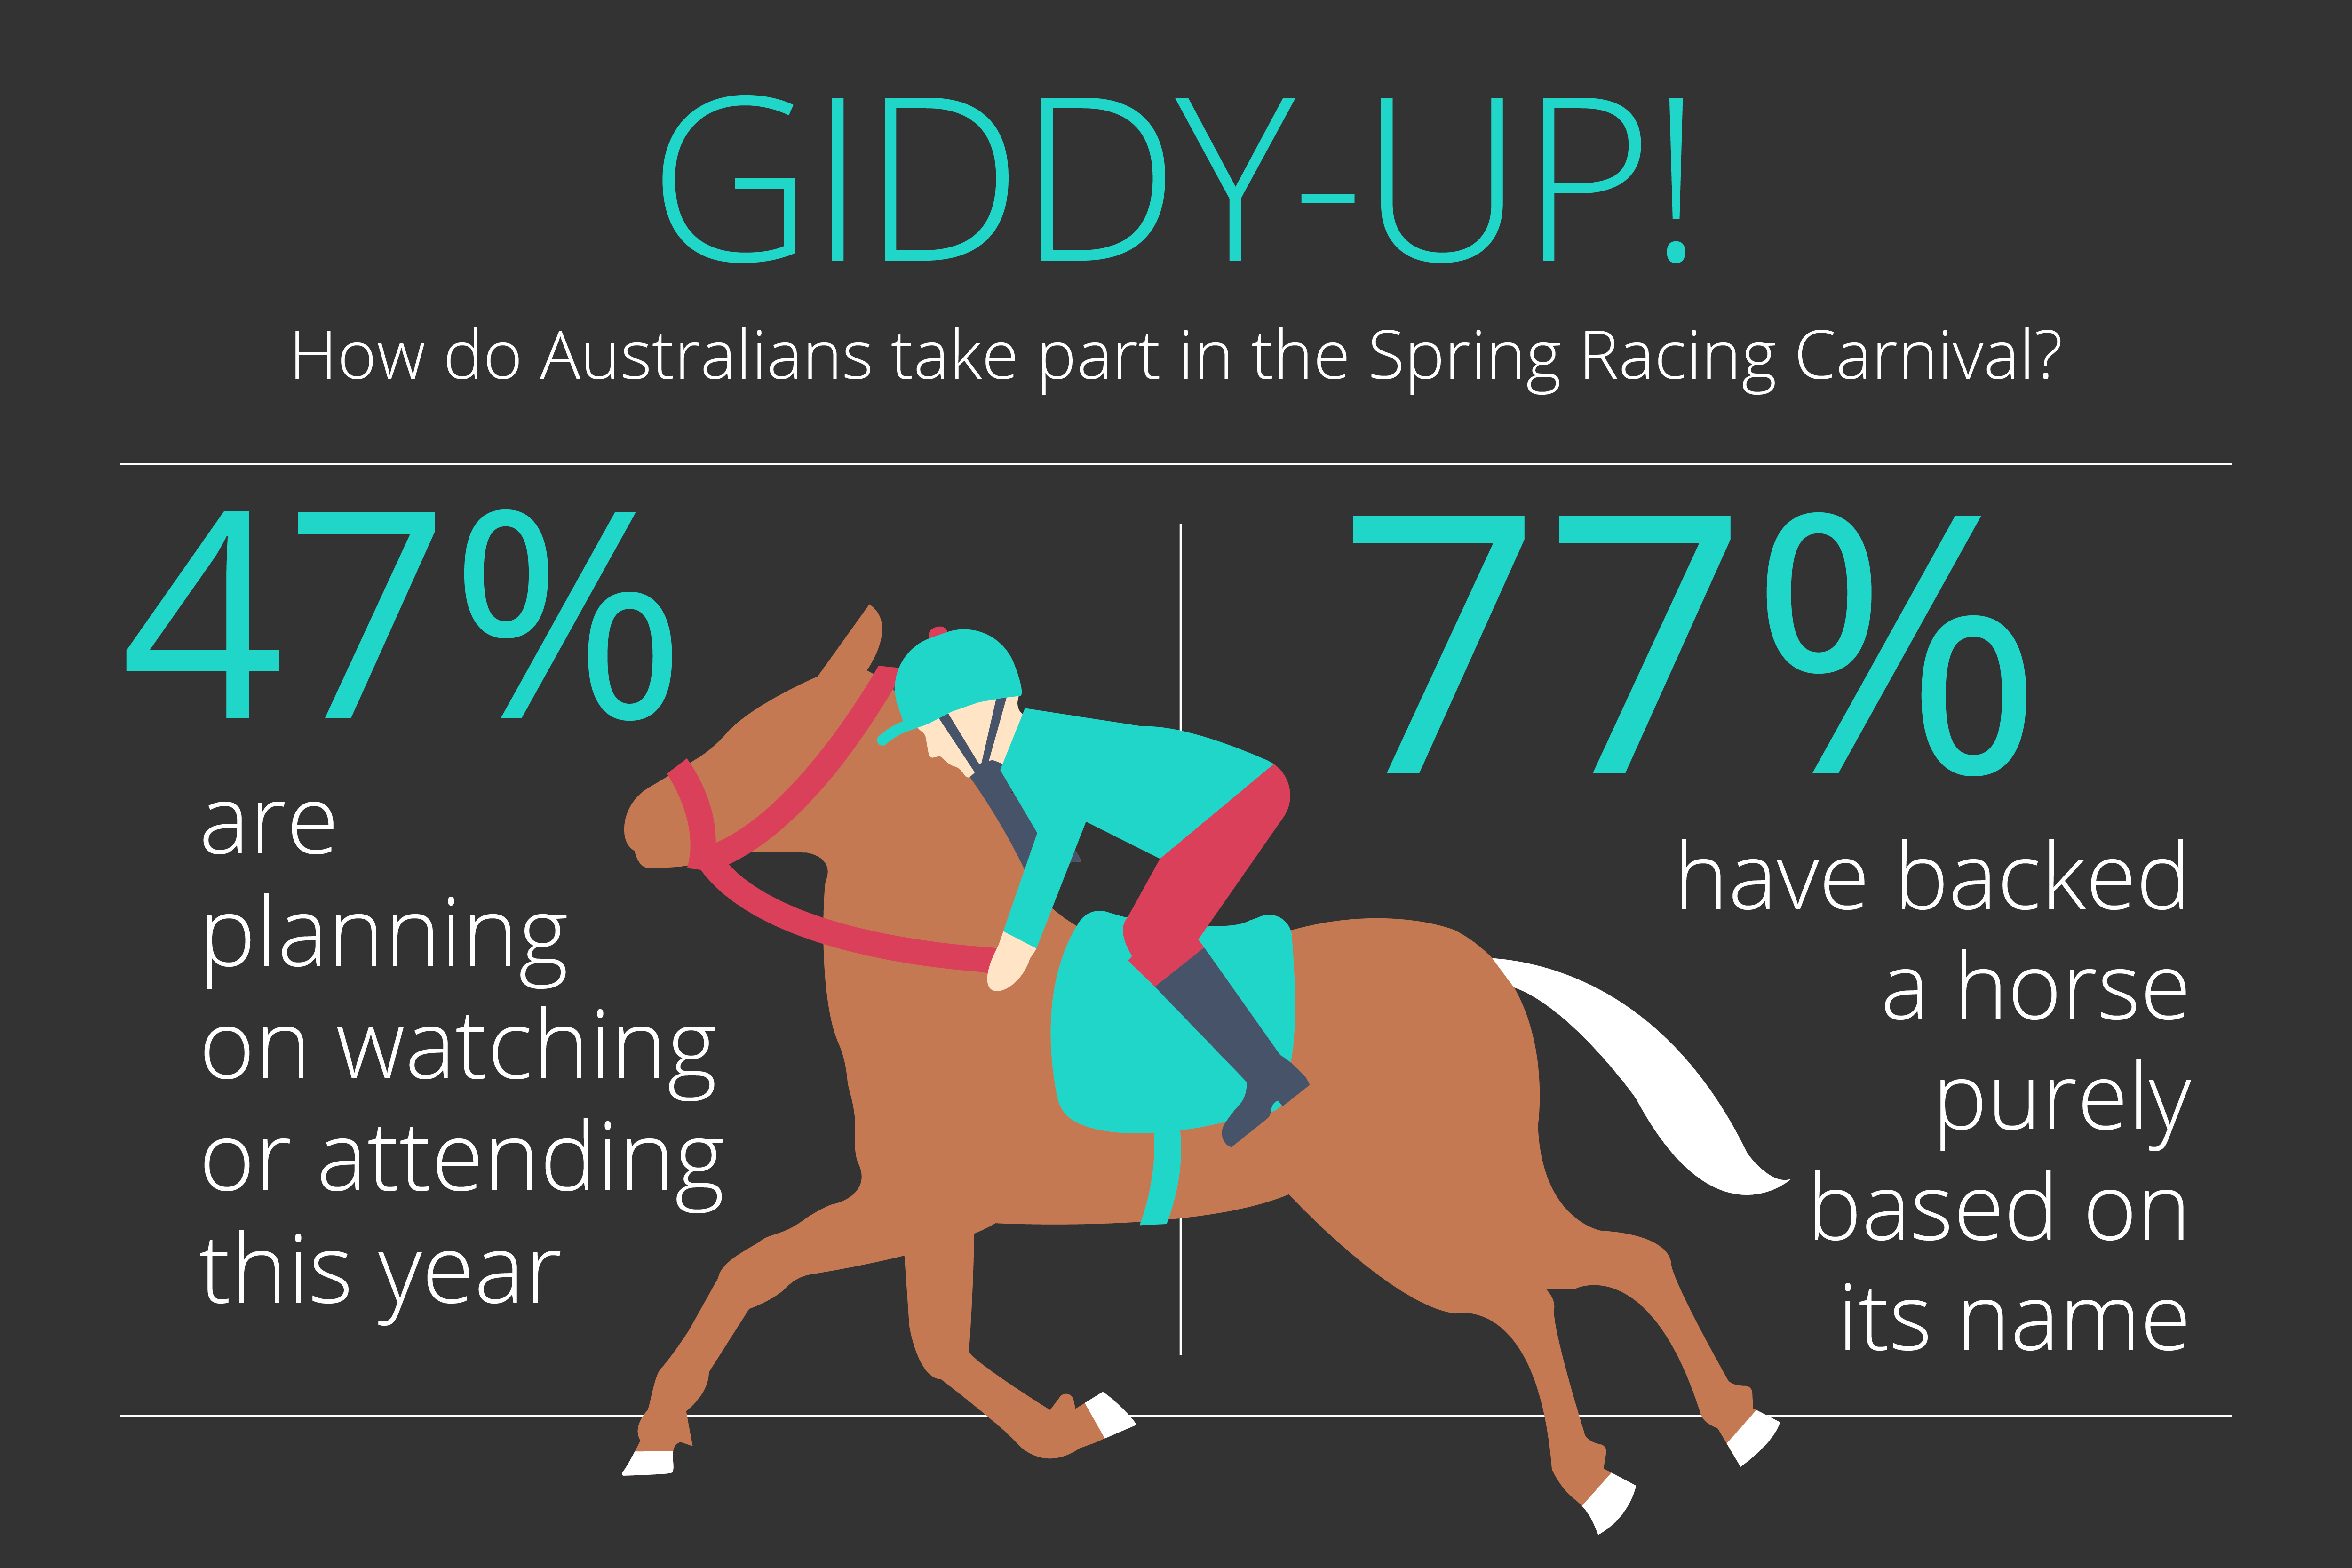 Infographic: Have you ever backed a horse purely based on its name?